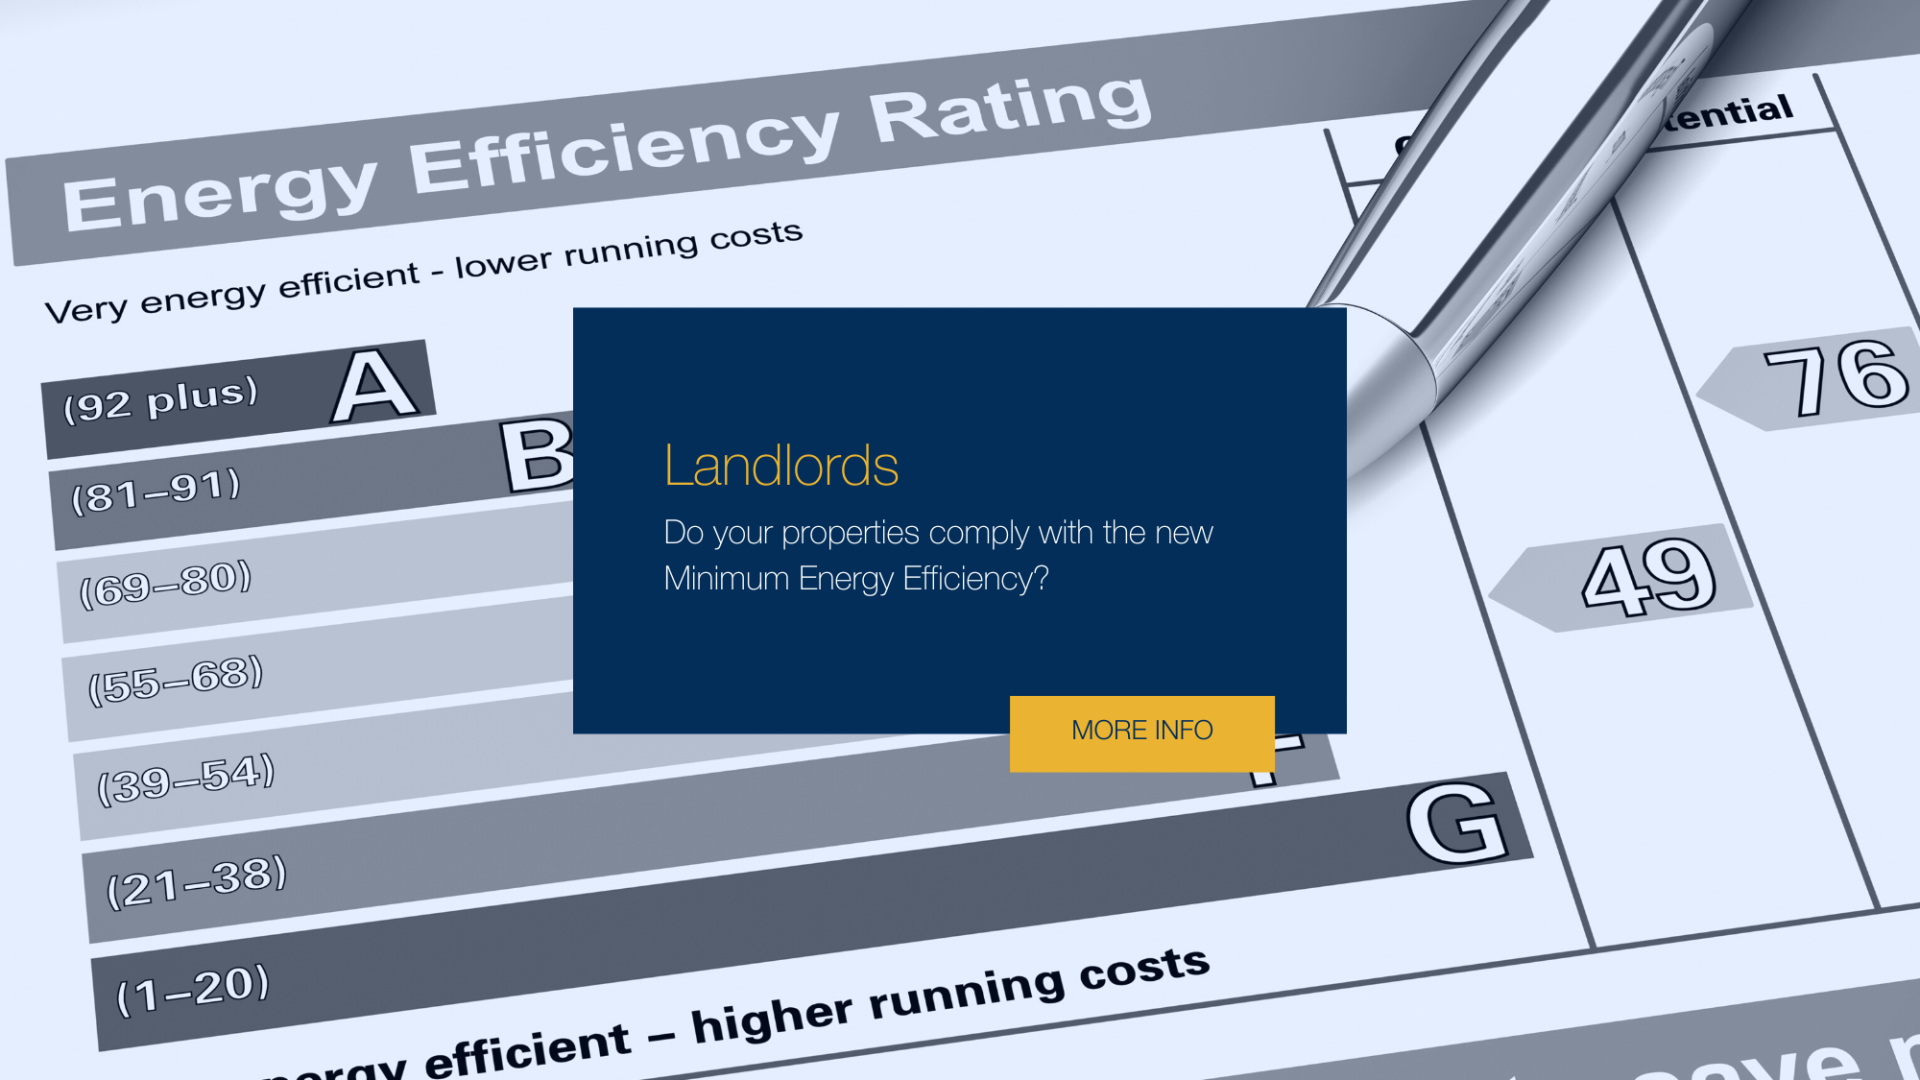 Landlords – Do your properties comply with the new